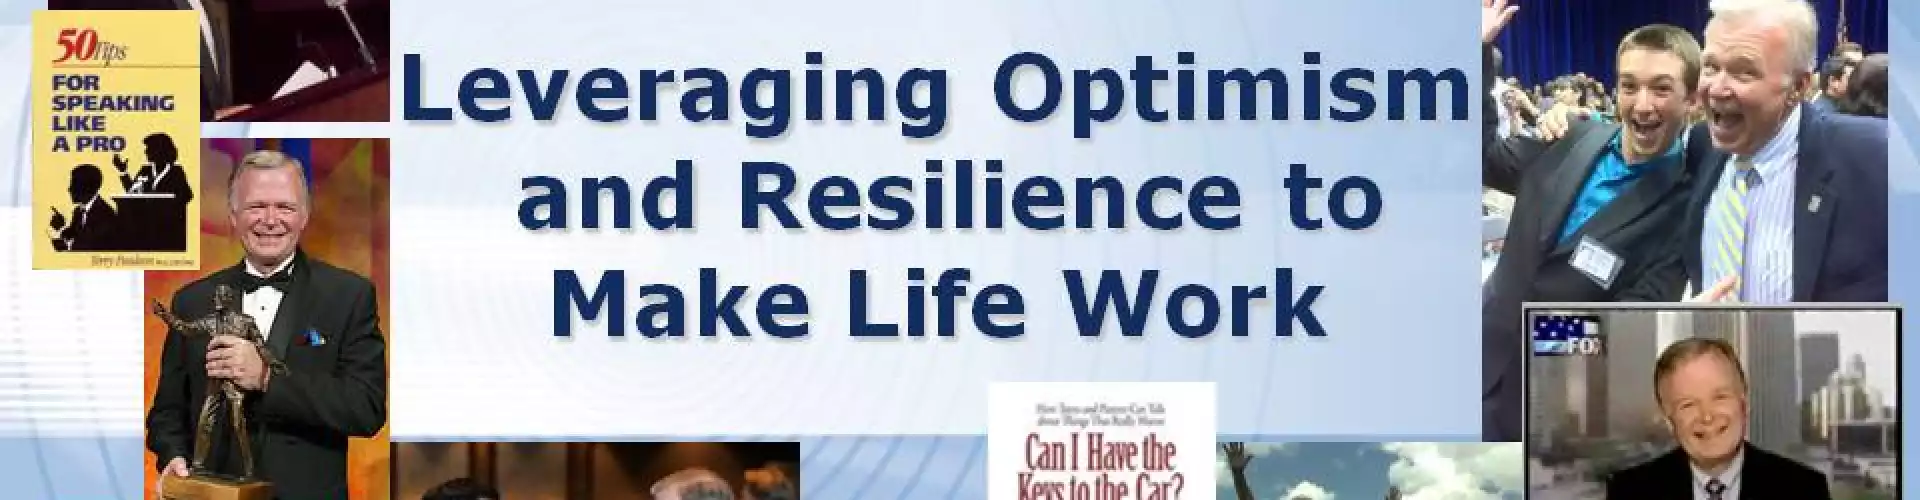 Leveraging Optimism and Resilience to Make Life Work